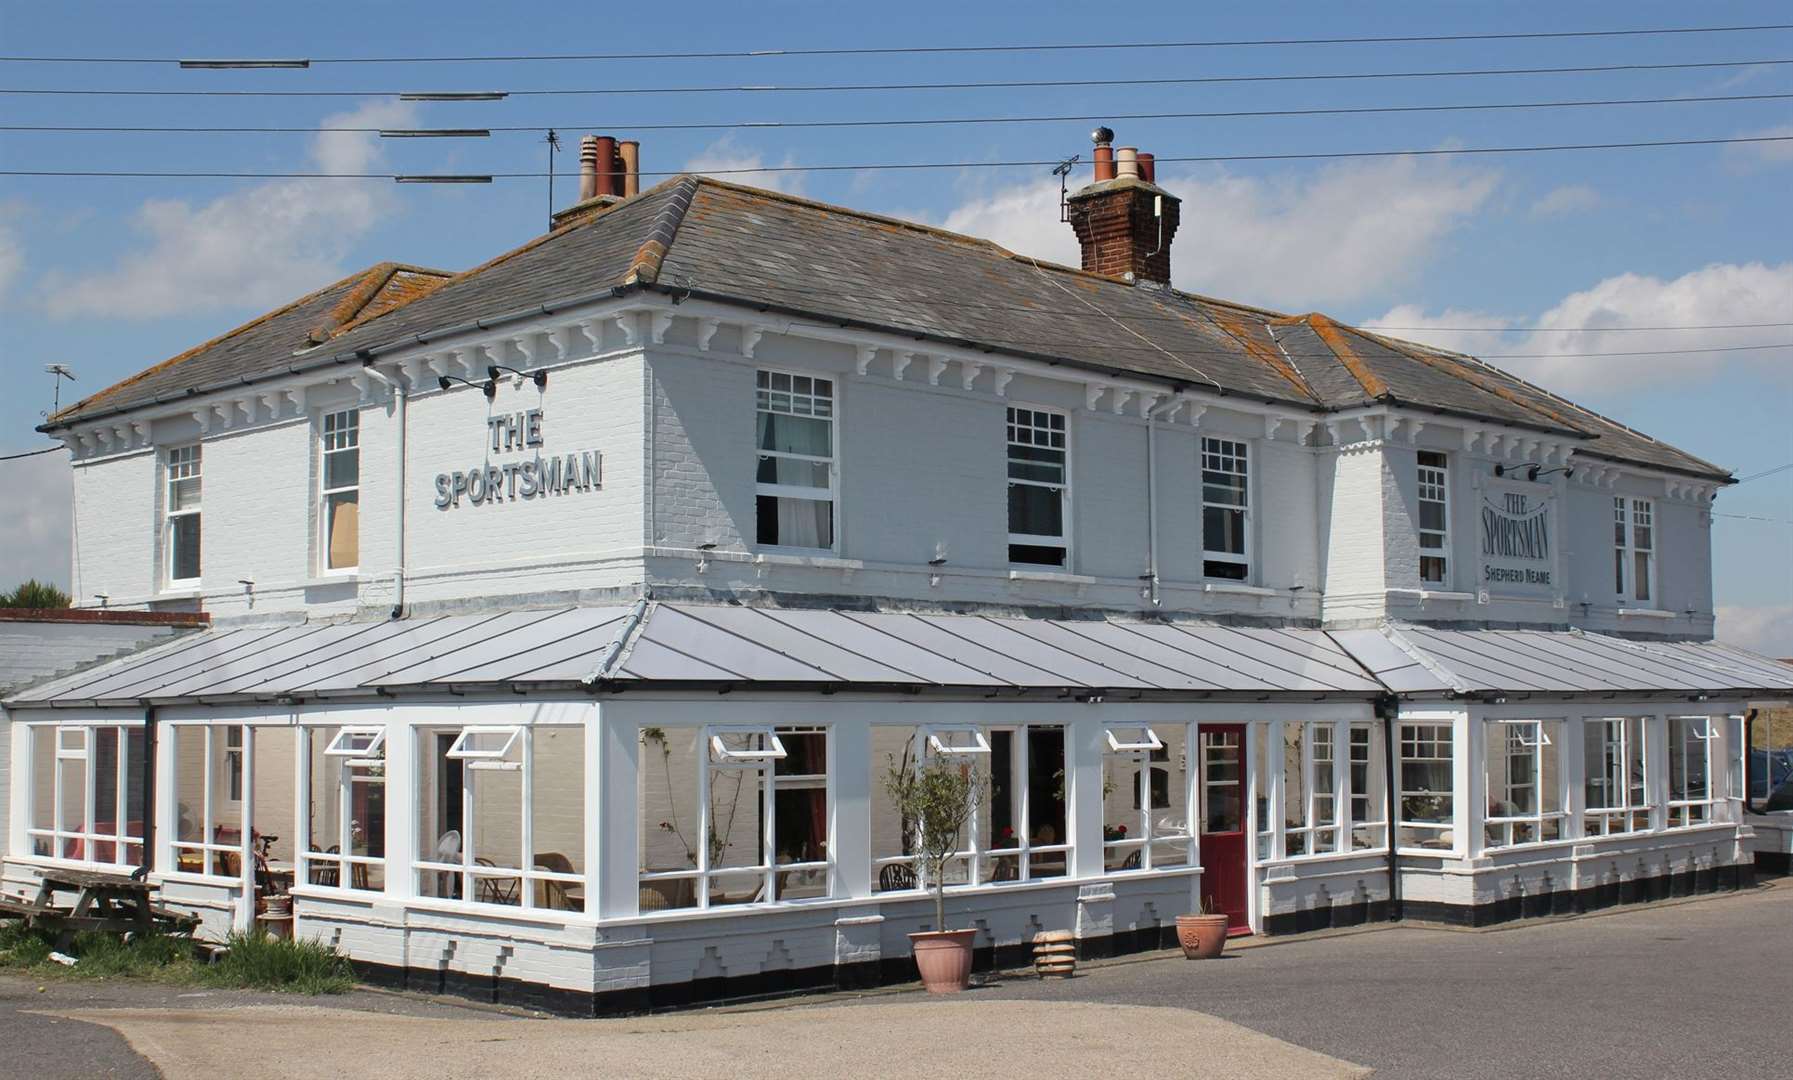 The Sportsman in Whitstable is just one of the eateries nominated for this year's Taste of Kent Awards. Picture: Mark Anthony Fox